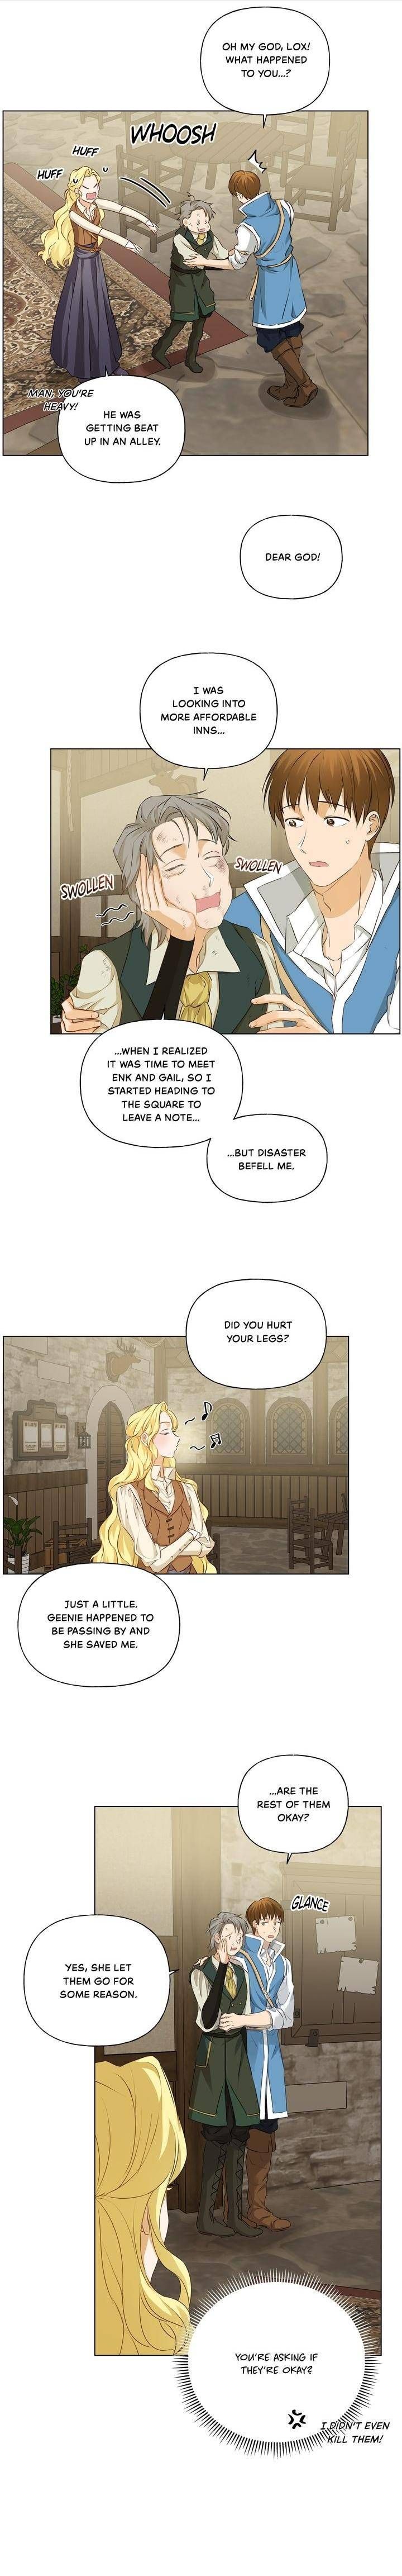 The Golden Haired Wizard Chapter 78 page 3